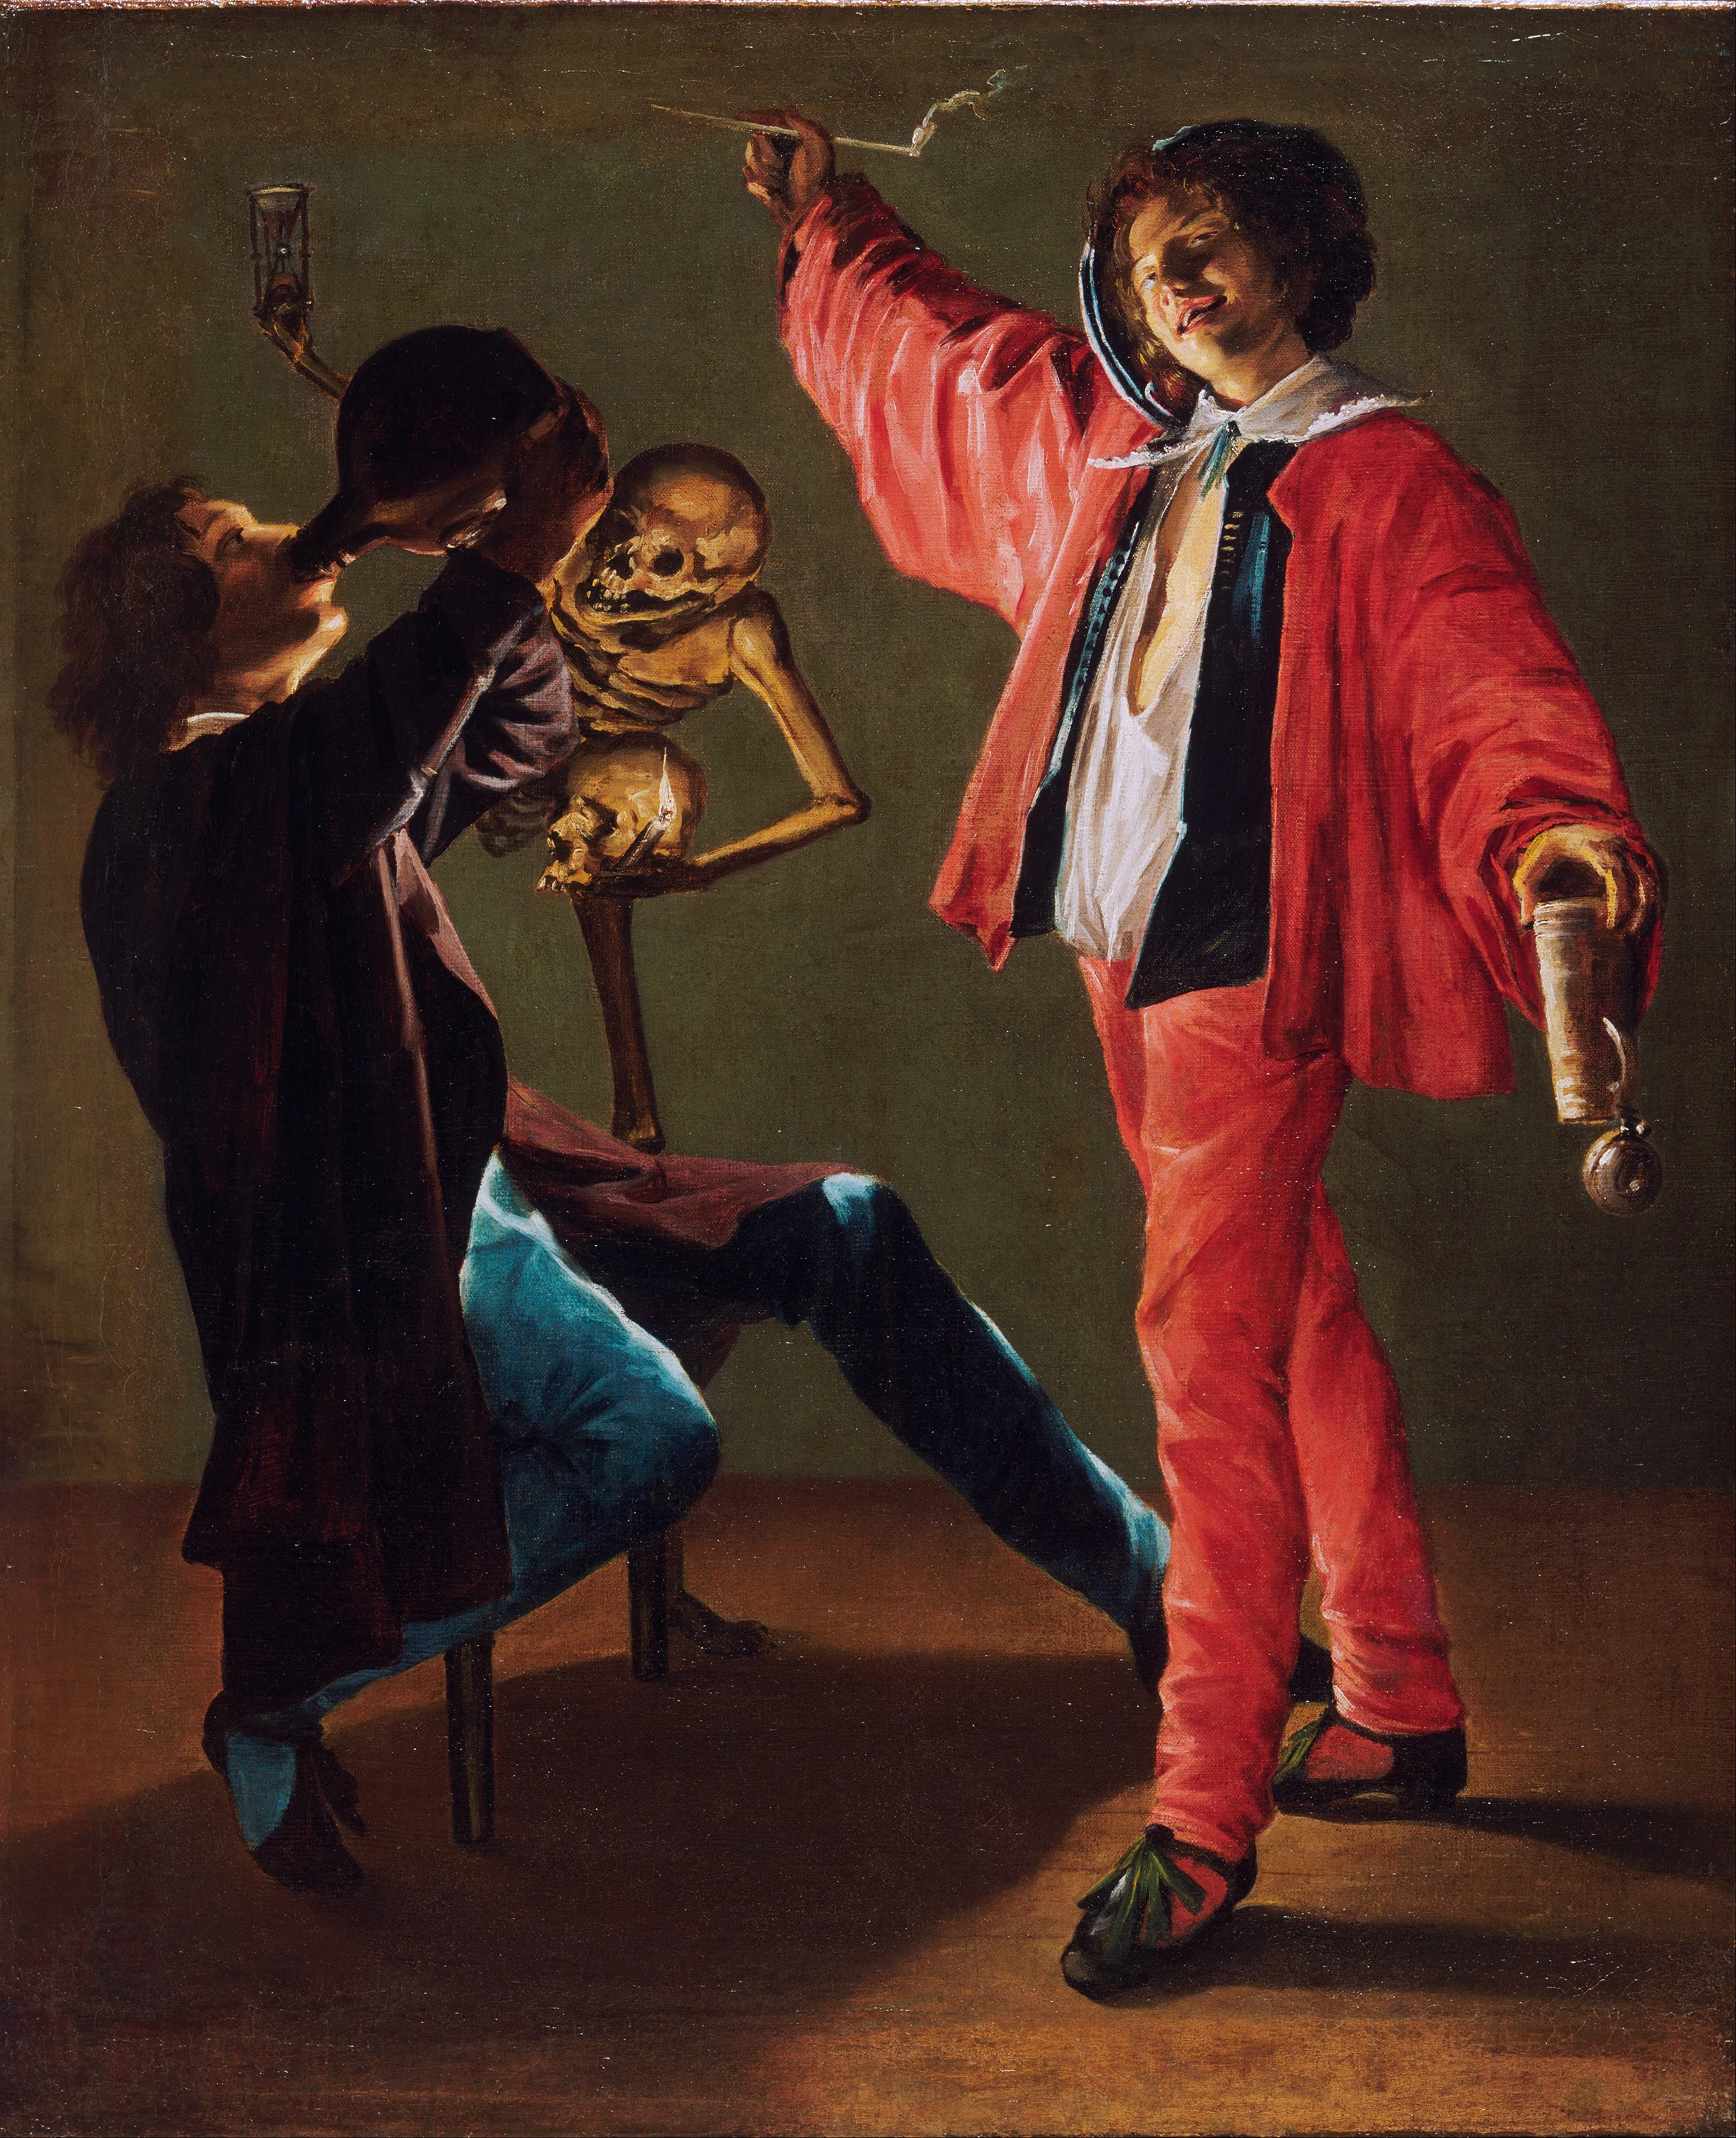 Judith Leyster, The Artists